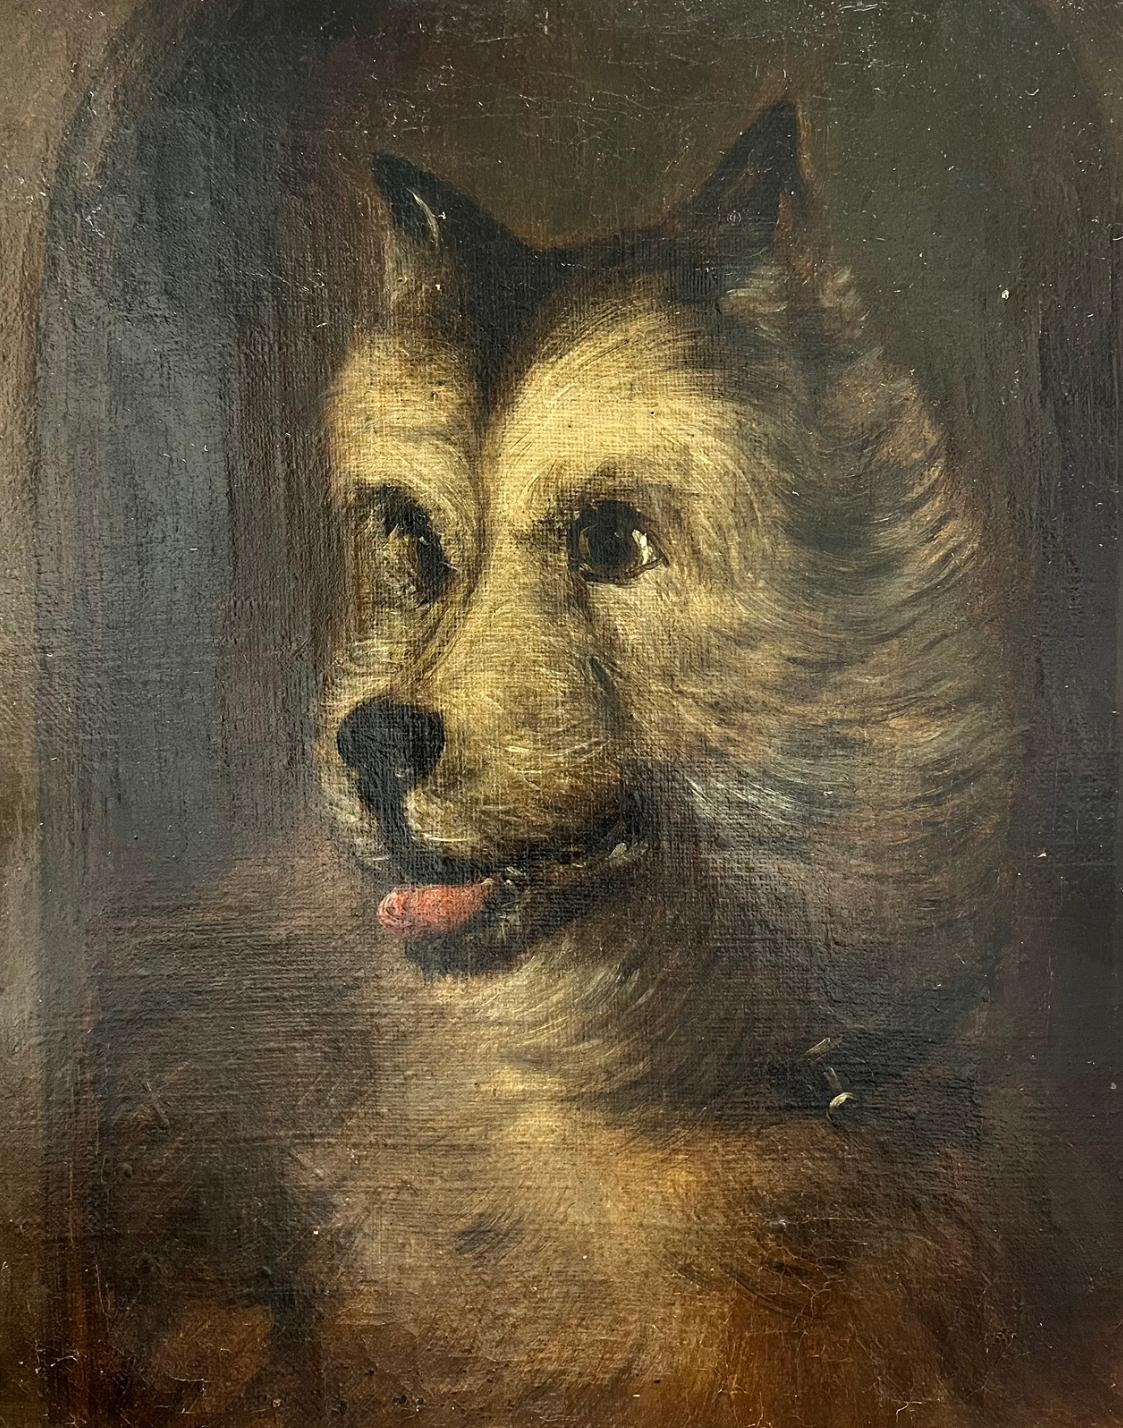 W.Mitchell Figurative Painting - Victorian English Dog Painting Oil on Canvas Head Portrait of Terrier